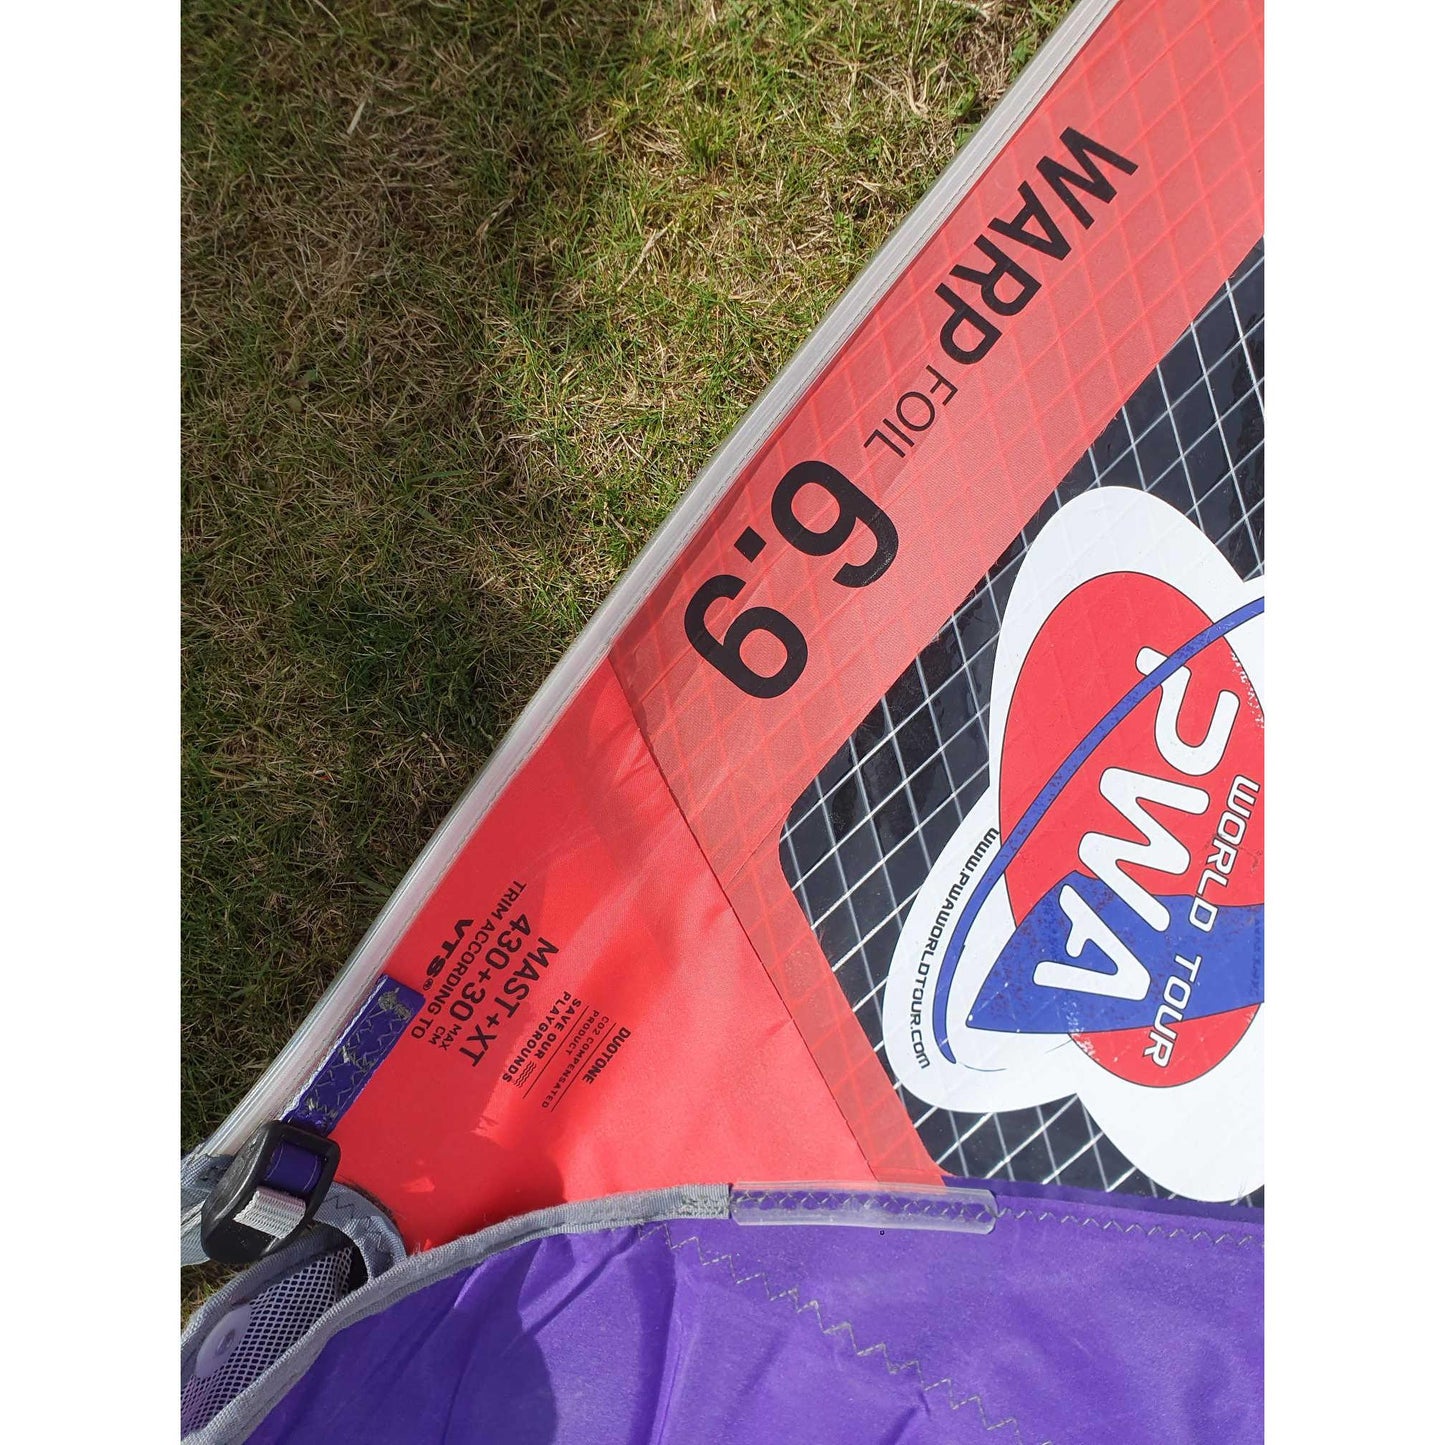 Duotone Warp Foil 6.9 second hand sail - Poole Harbour Watersports